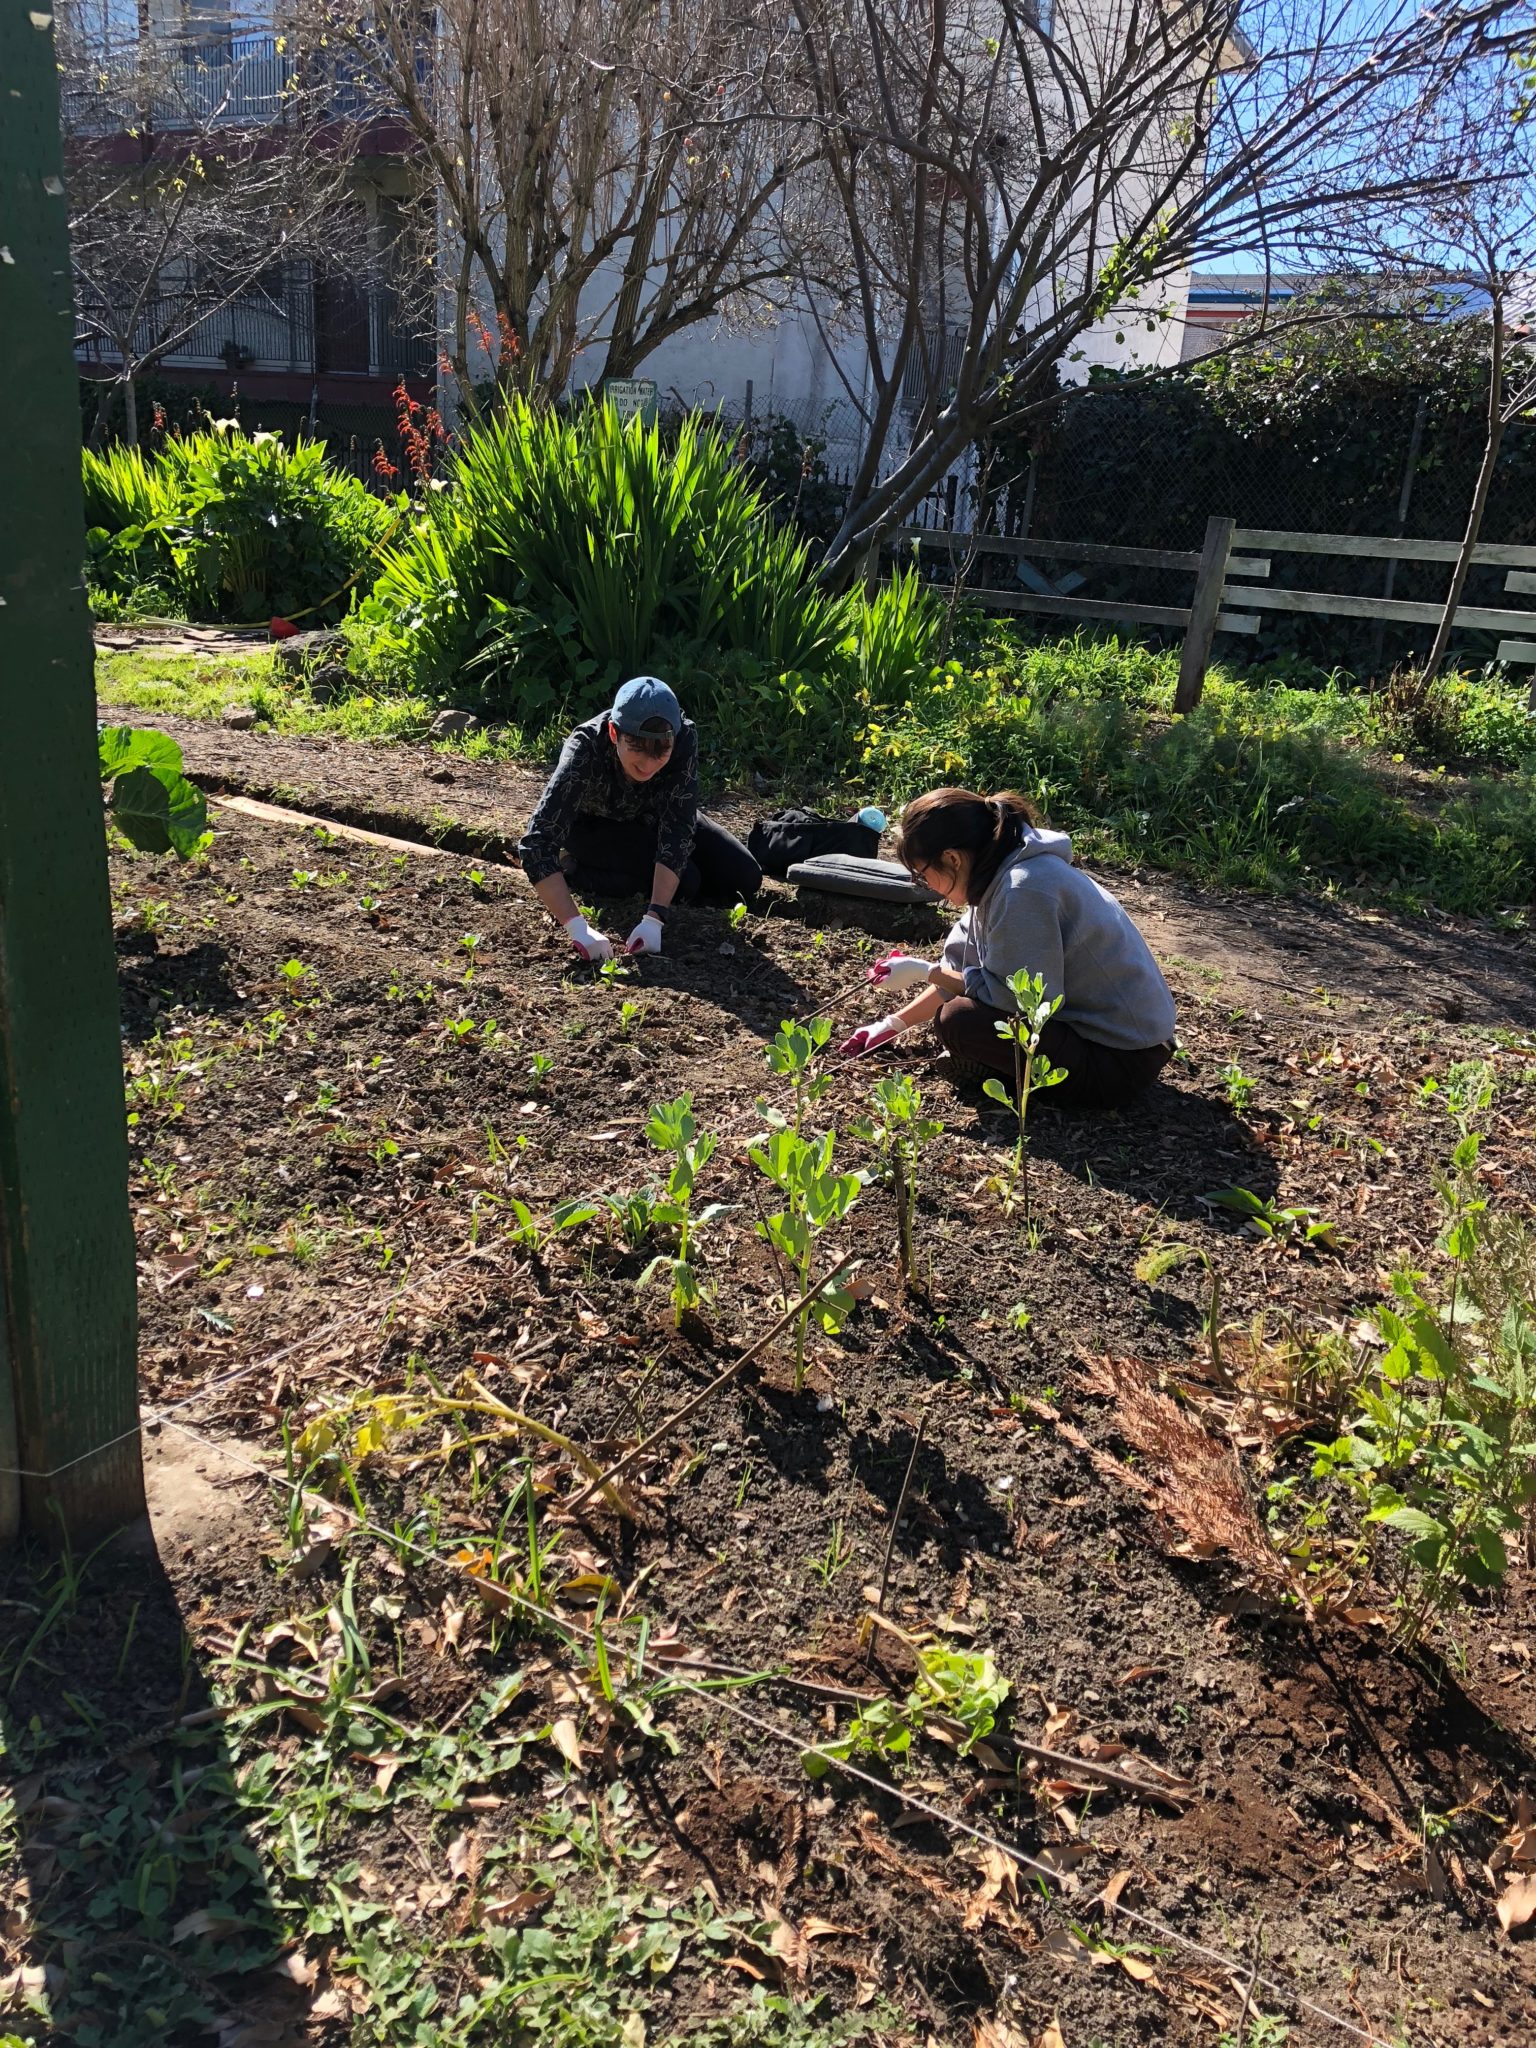 Students working in a garden.